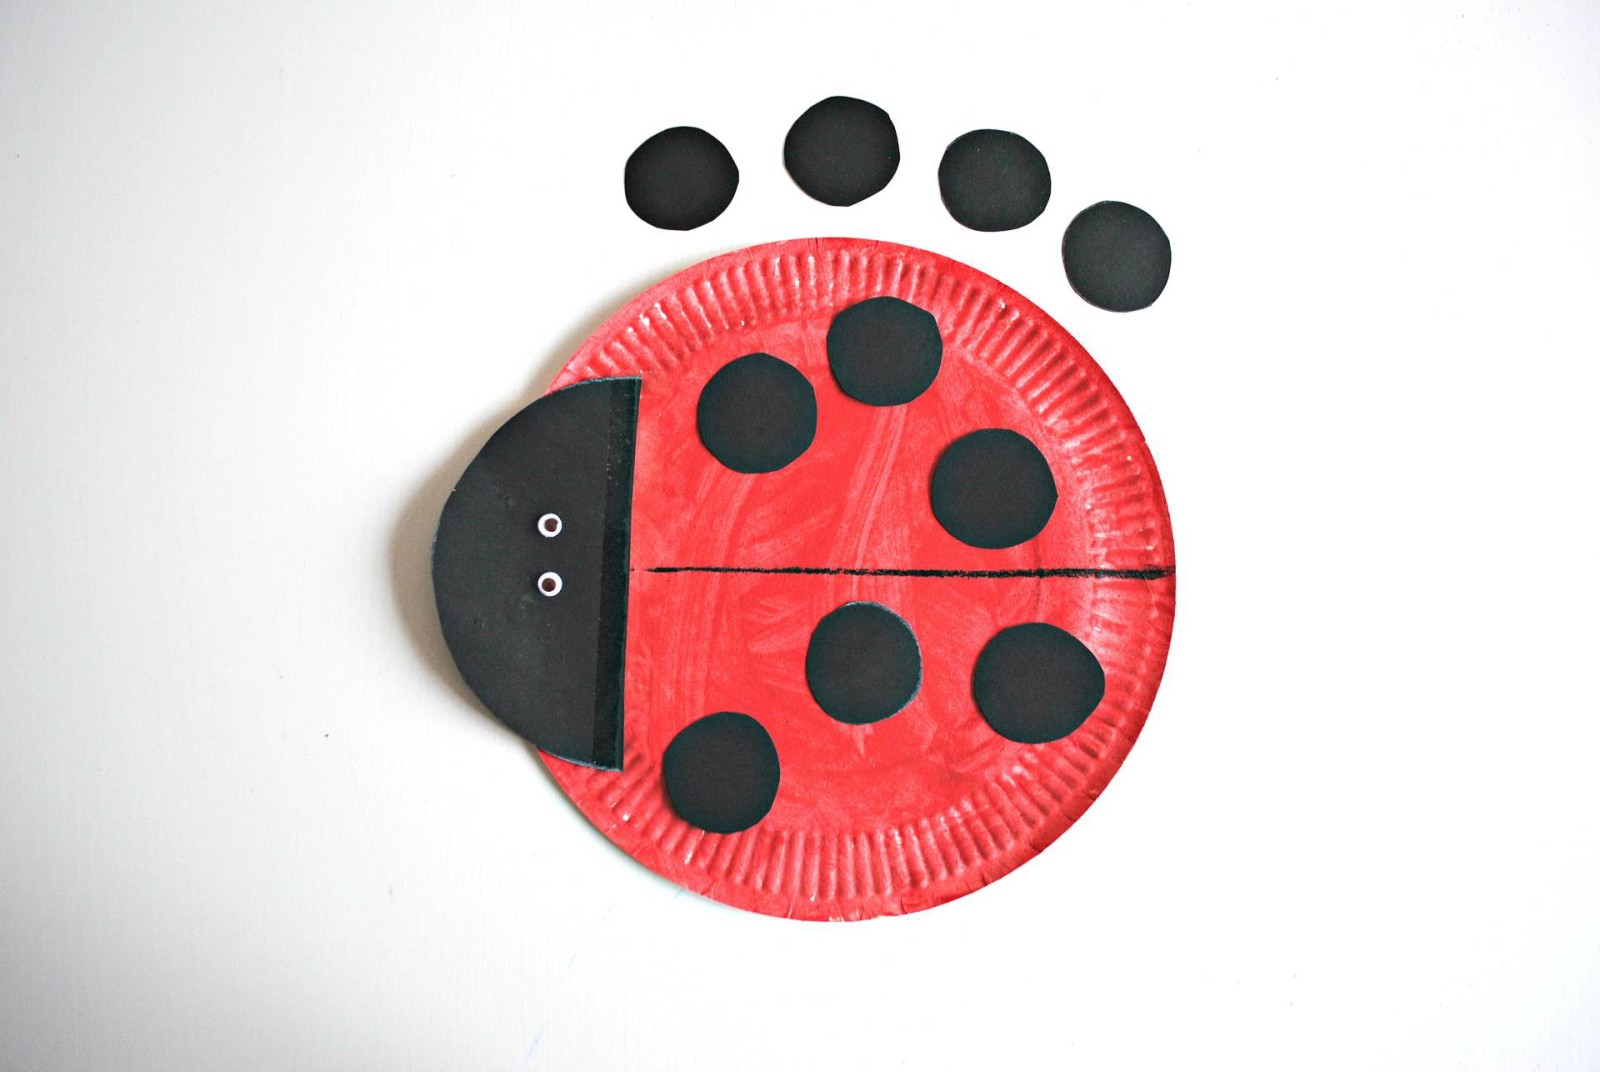 Ladybird Learning-to-Count Craft - The Spirited Puddle Jumper